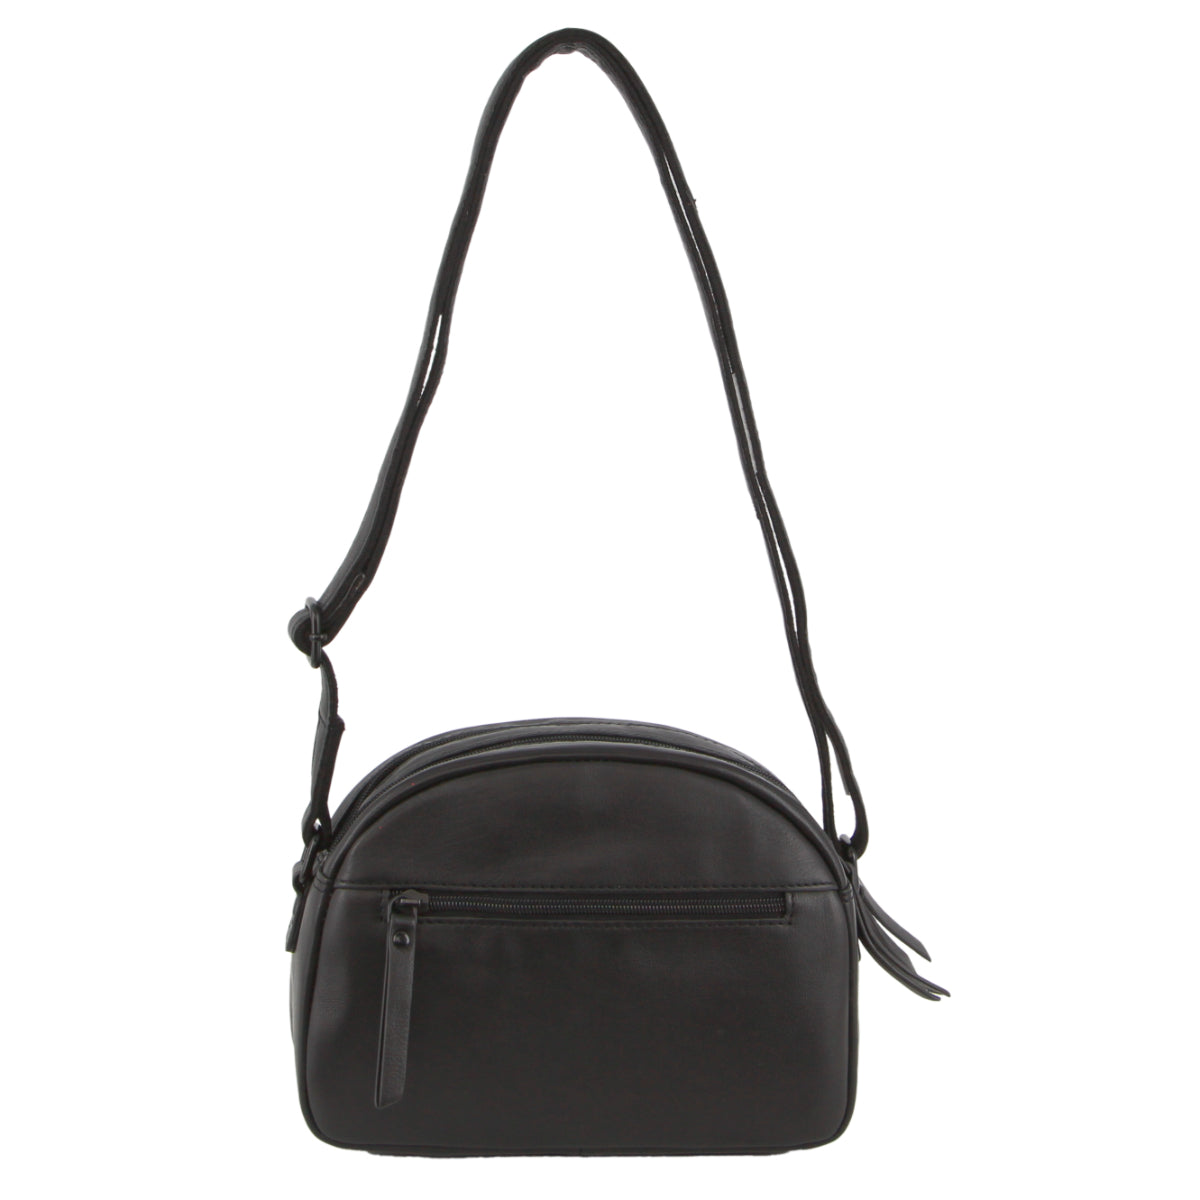 Milleni - NL3869 Small rounded leather sidebag - Black